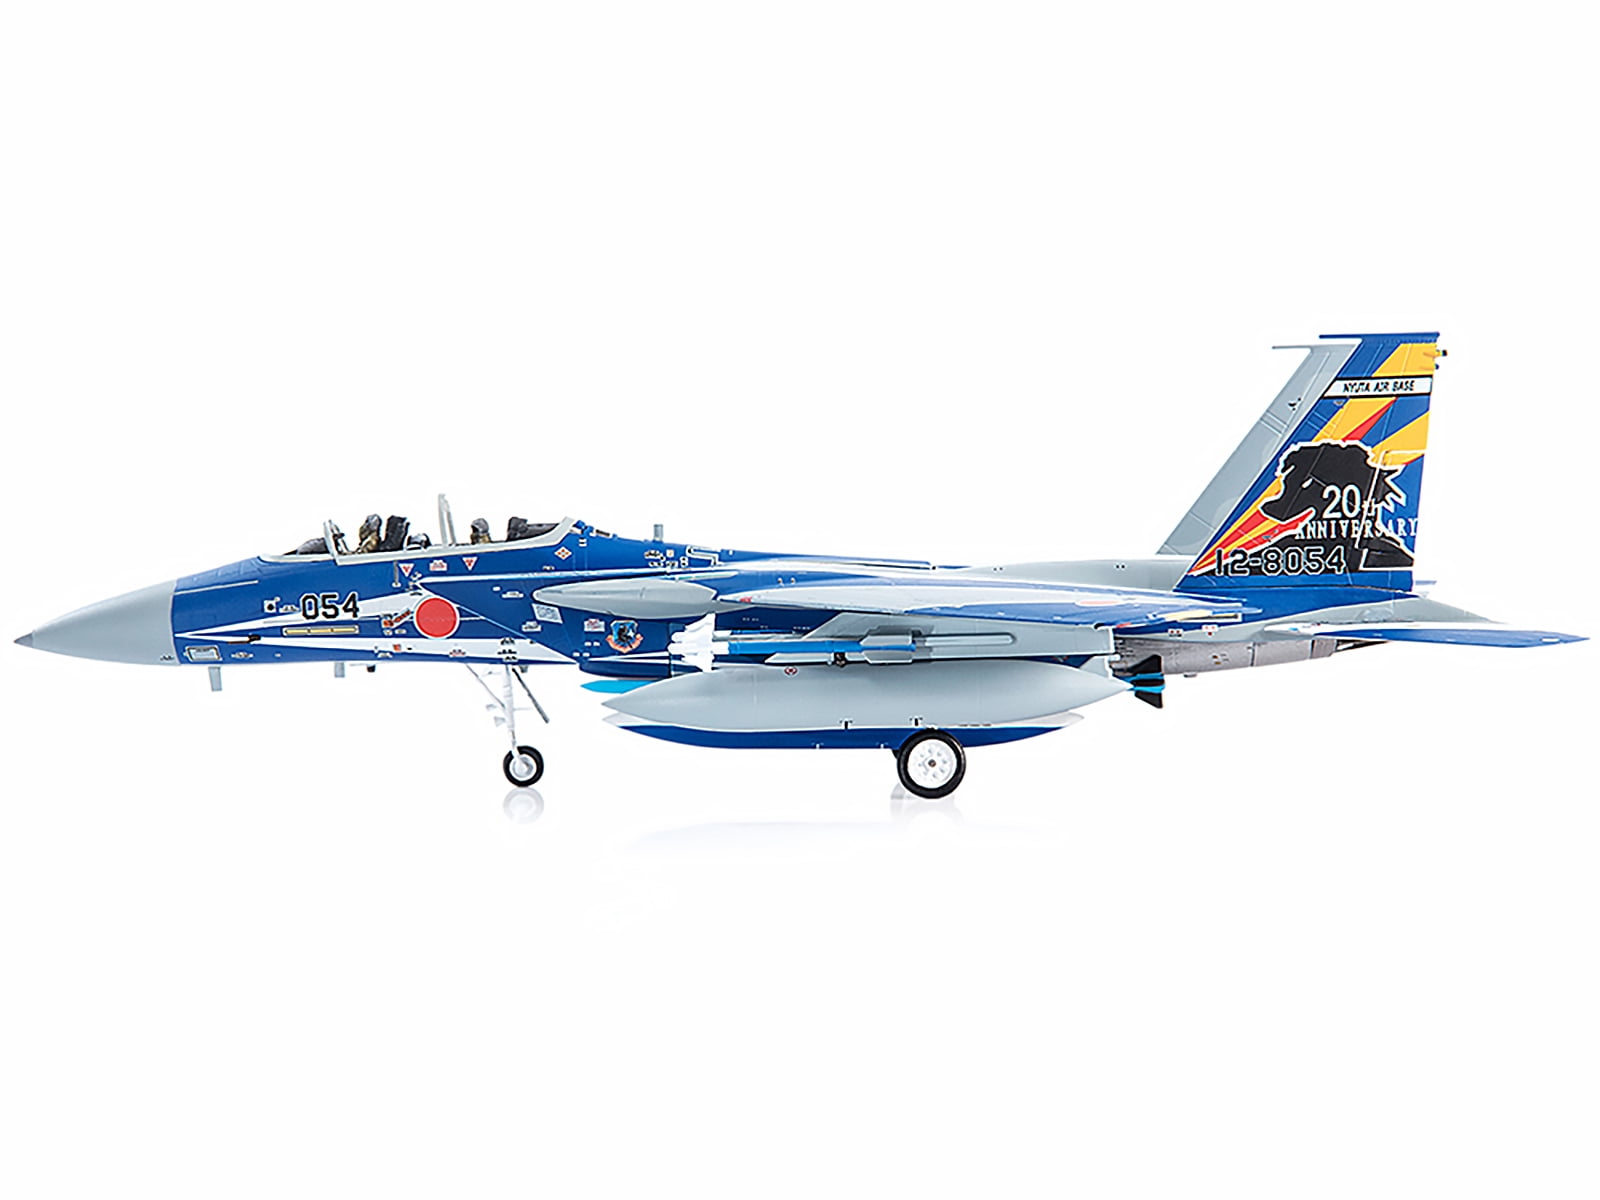 F-15DJ JASDF (Japan Air Self-Defense Force) Eagle Fighter Aircraft w/Stand  Ltd Ed to 600 pcs 1/72 Diecast Model by JC Wings